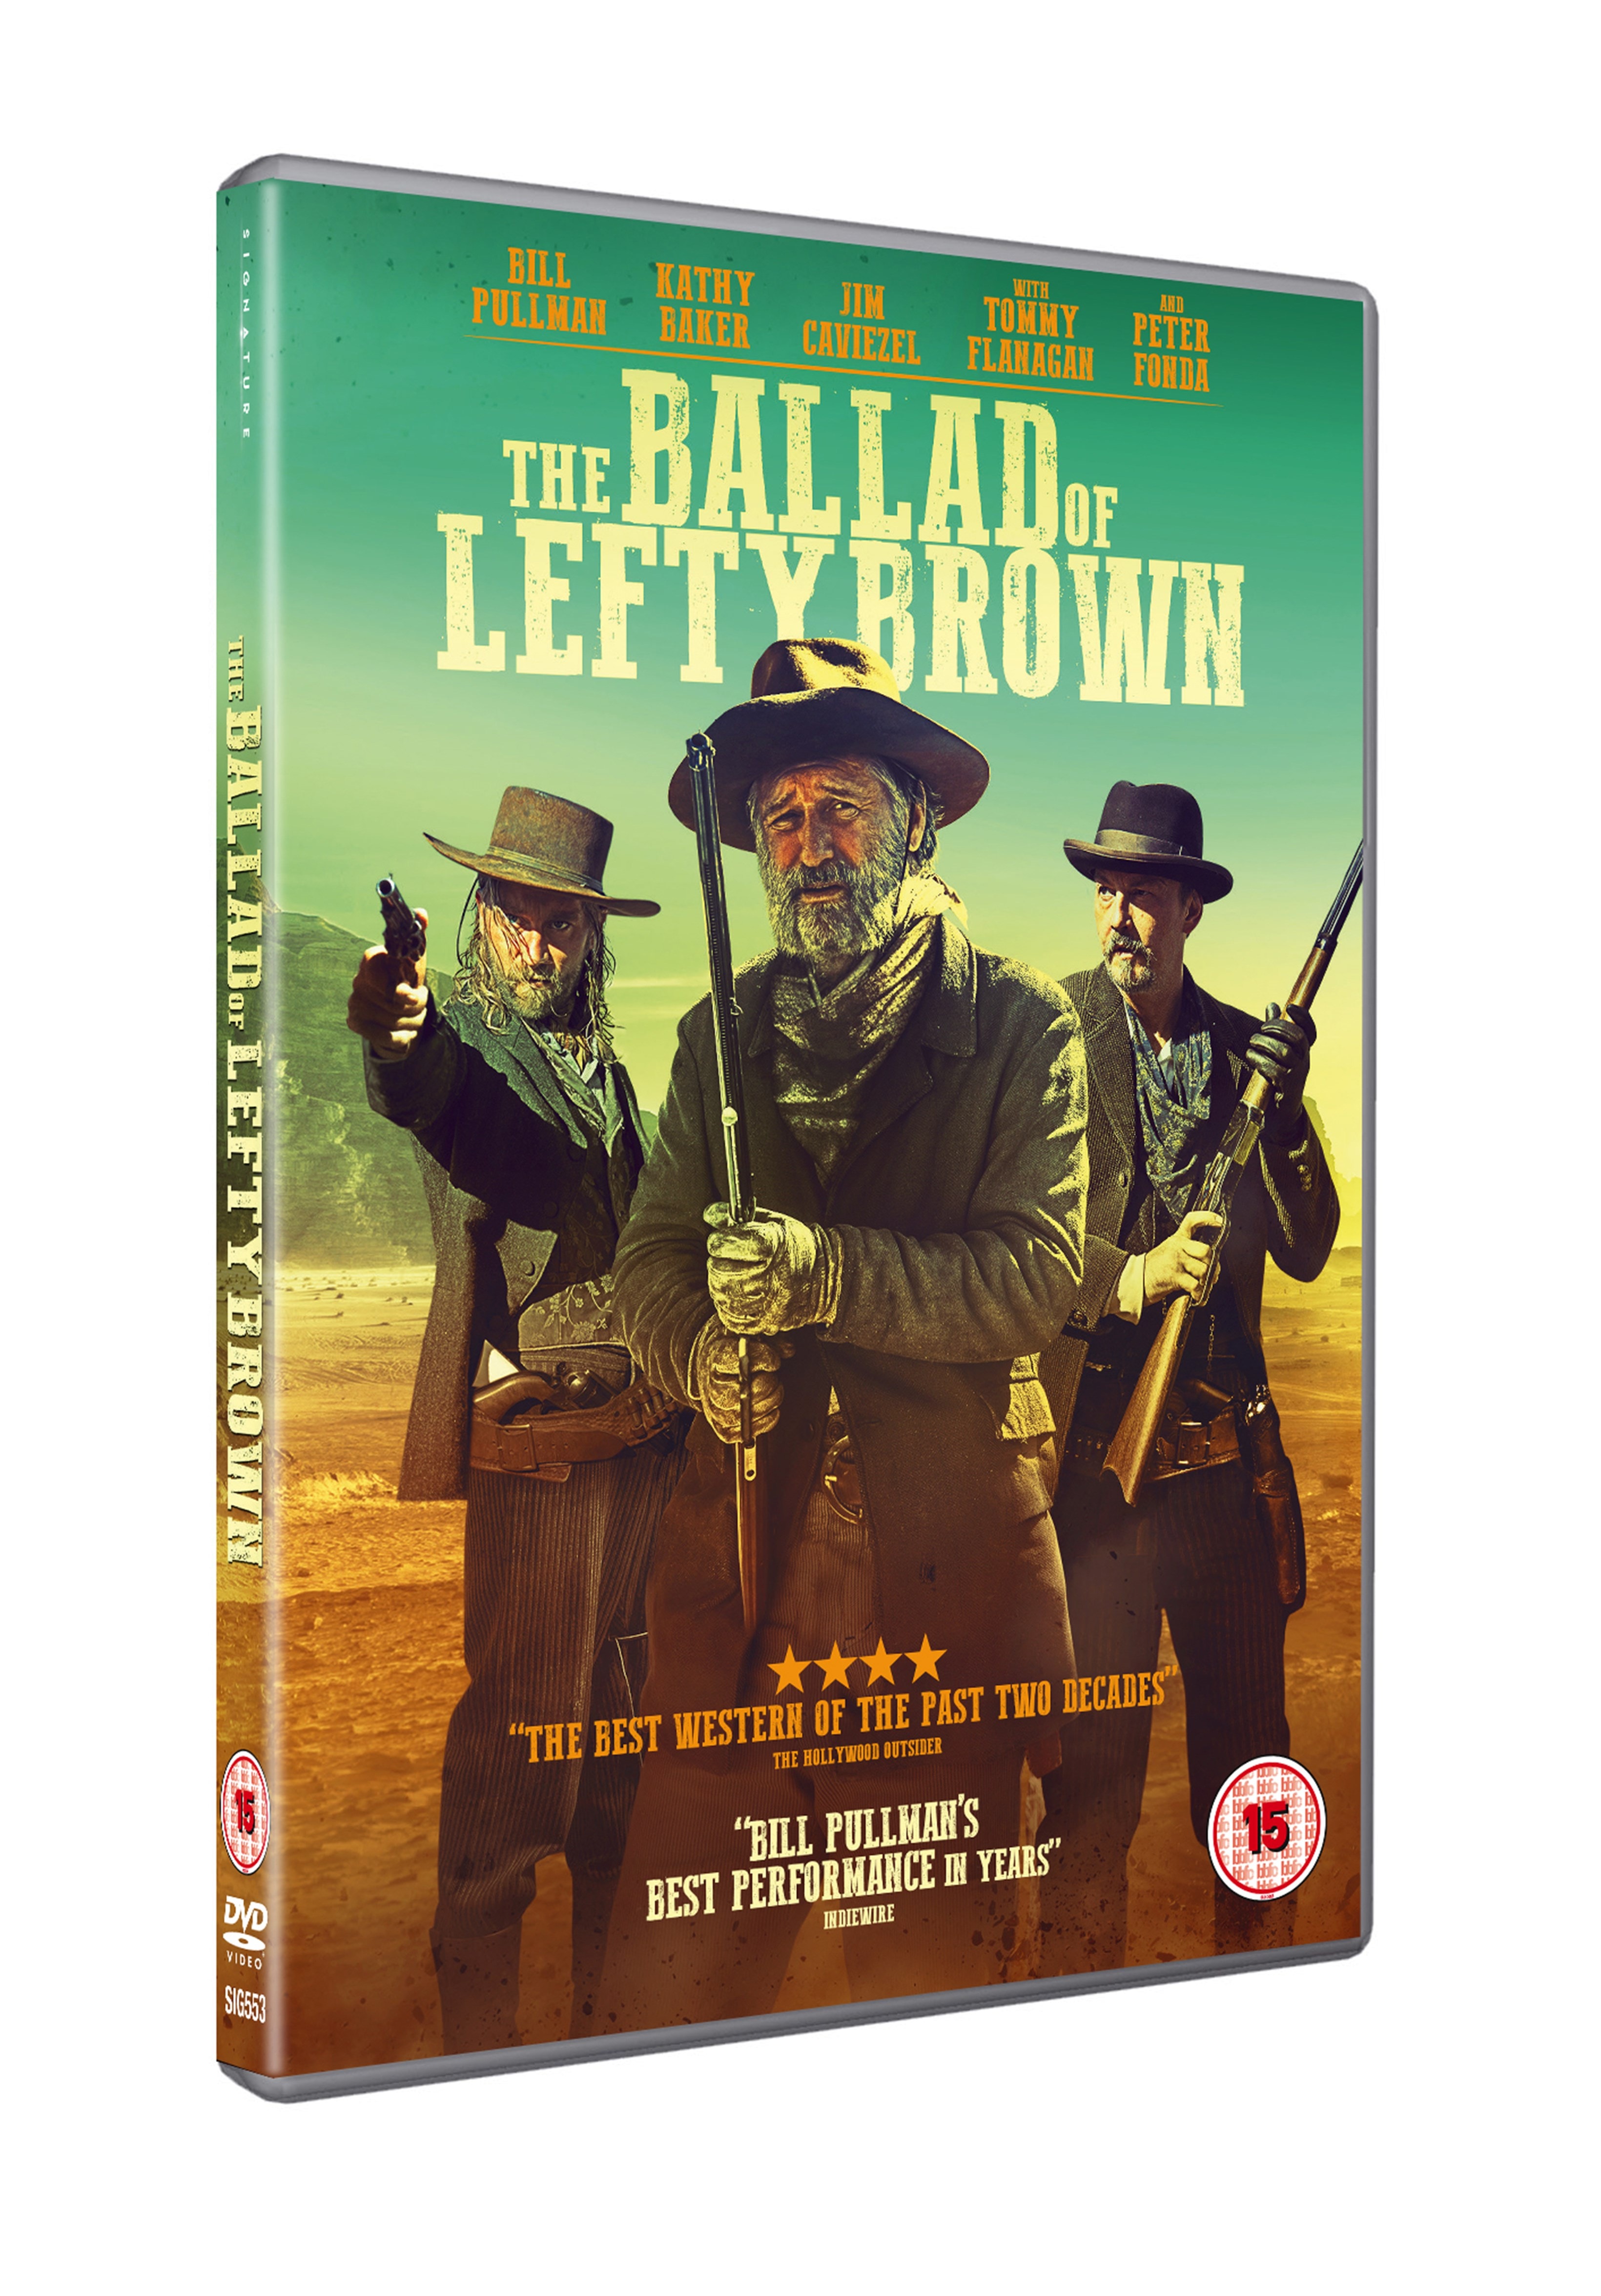 The Ballad of Lefty Brown | DVD | Free shipping over £20 ...